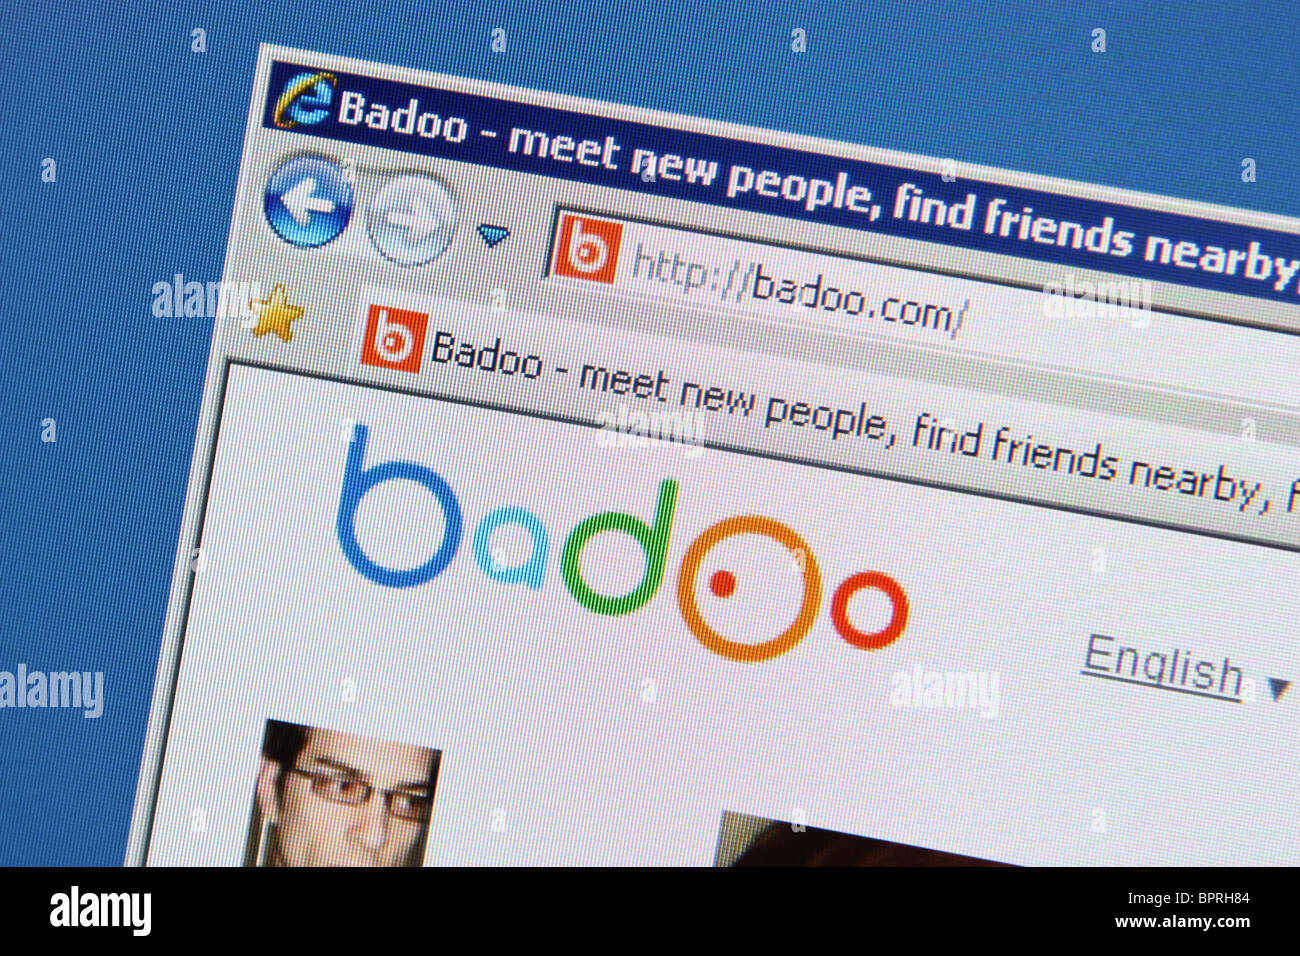 Can others see the linked number on badoo